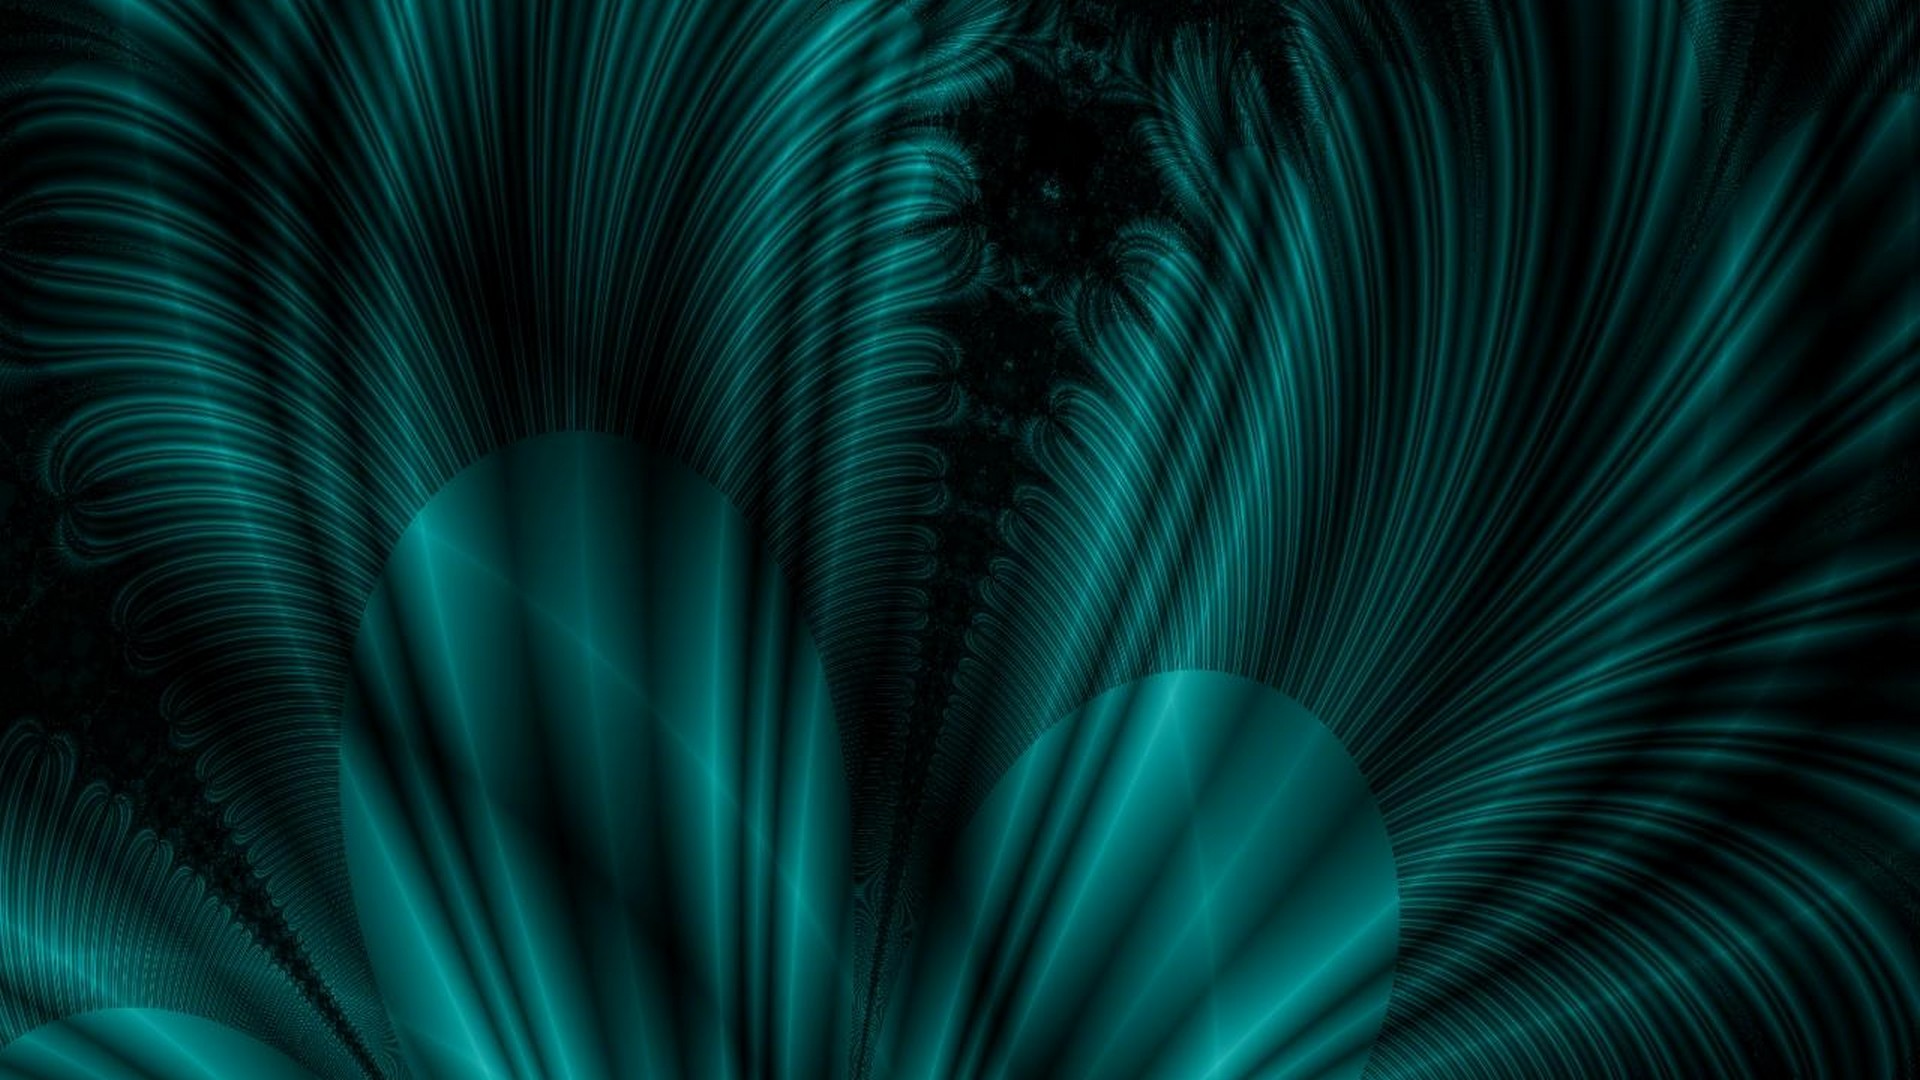 Dark Teal HD Wallpaper with image resolution 1920x1080 pixel. You can make this wallpaper for your Desktop Computer Backgrounds, Mac Wallpapers, Android Lock screen or iPhone Screensavers